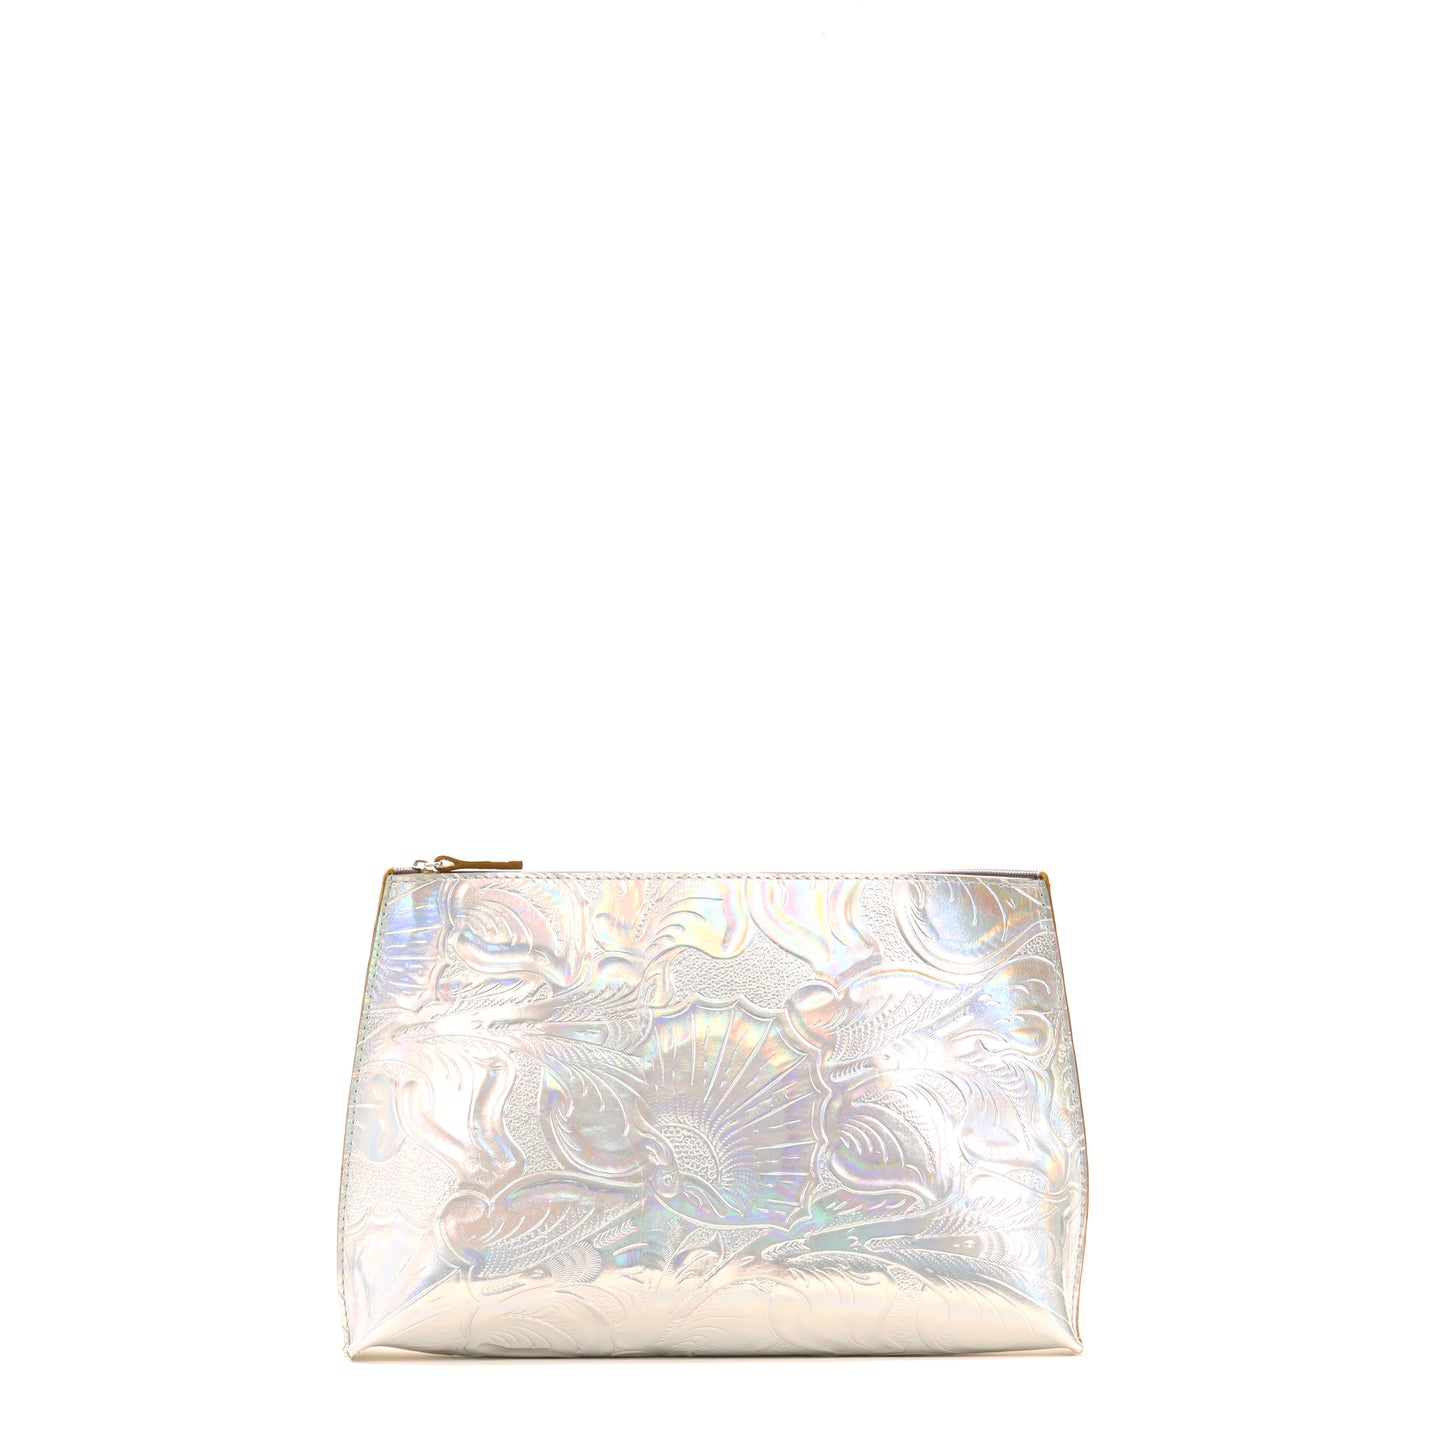 TRAVEL POUCH TRIPPY FLORAL